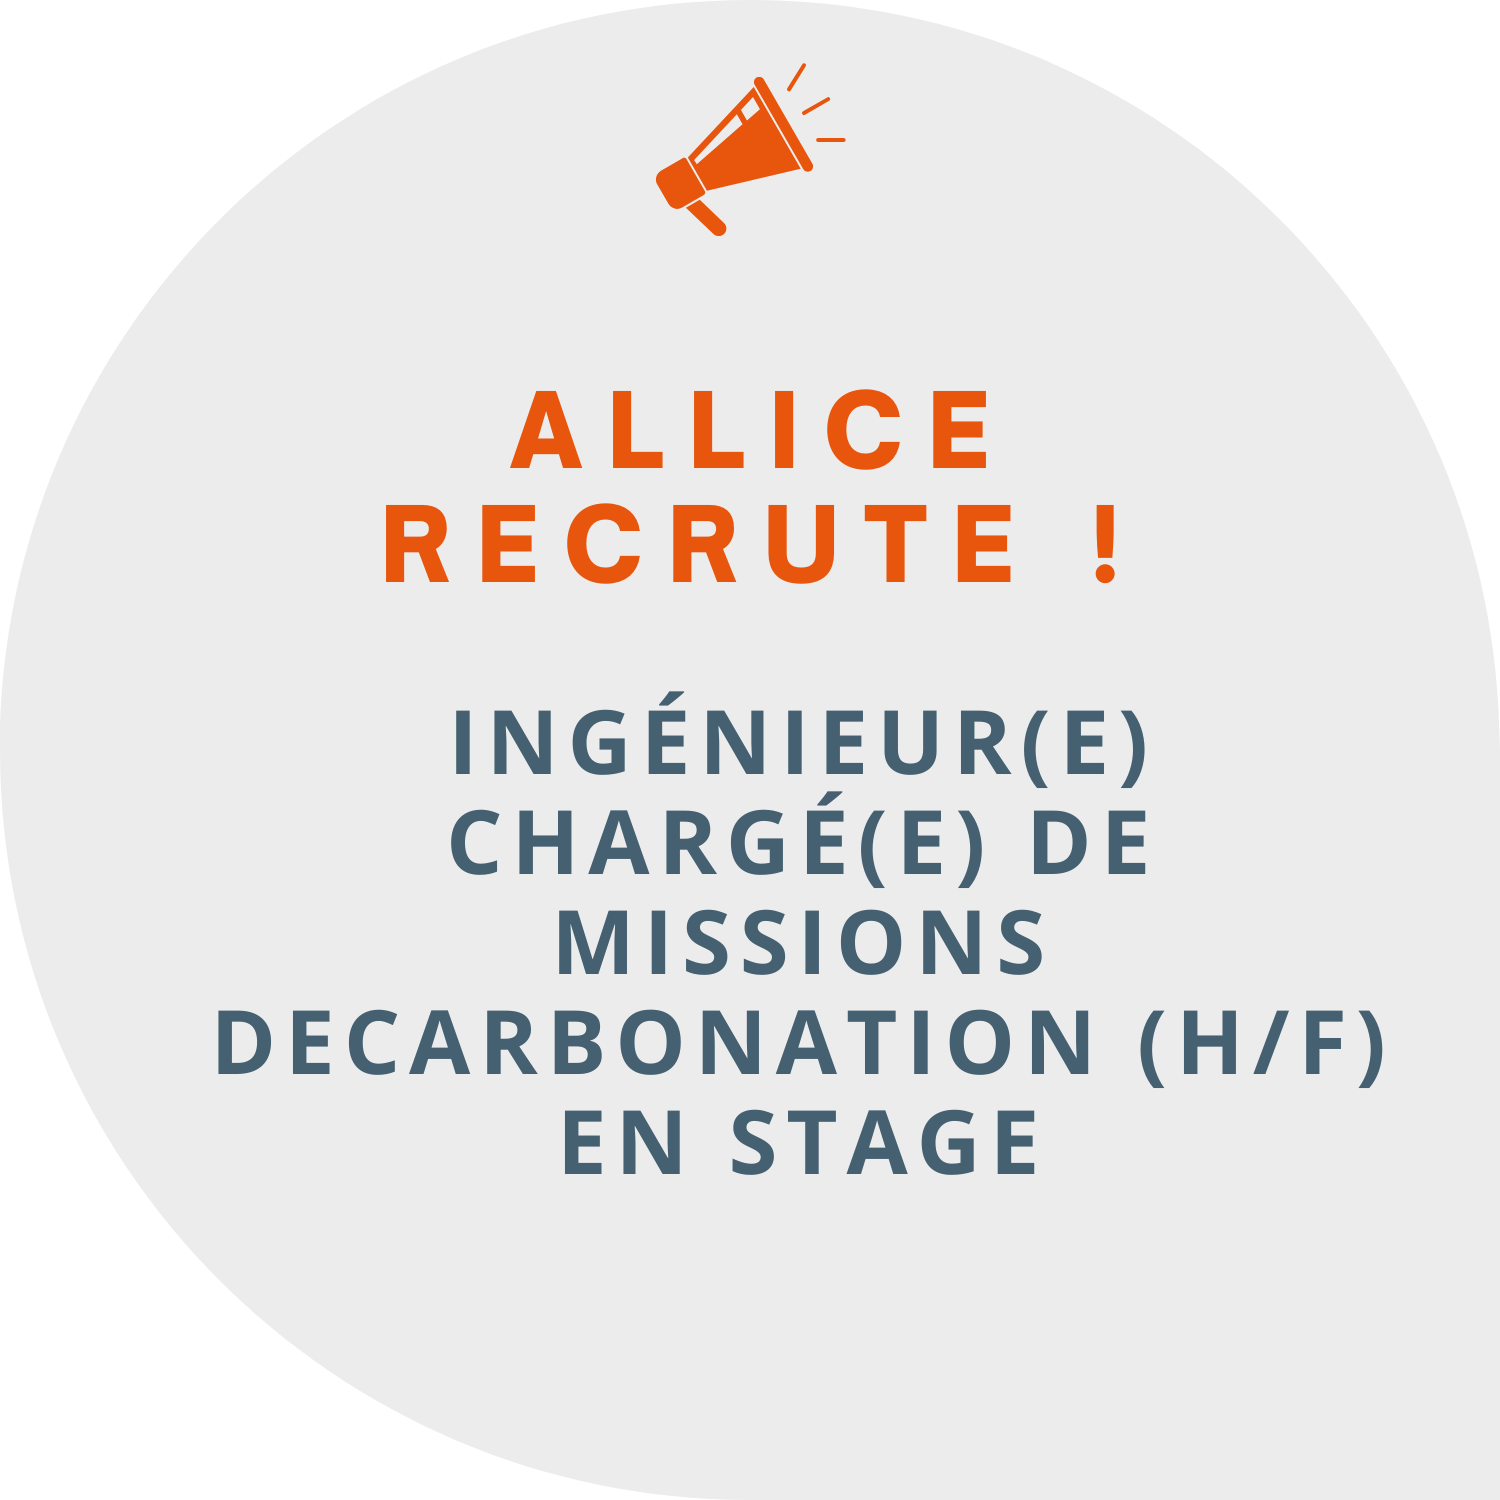 Actu_Recrutement_Stage_Charge_Mission_Decarbonation_112022